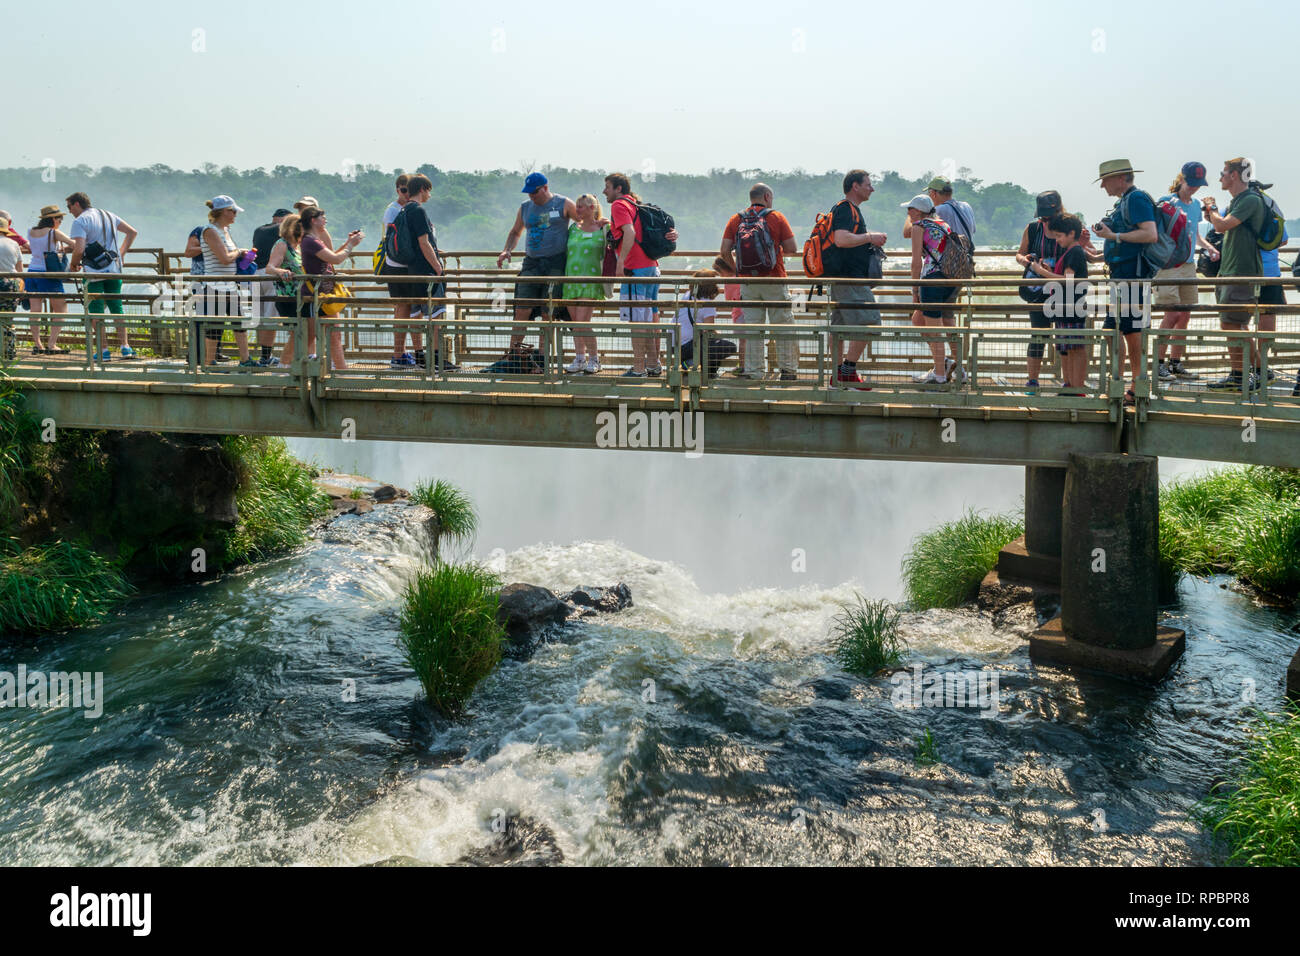 PUERTO IGUAZU, MISIONES, ARGENTINA - SEPTEMBER 17, 2015: Tourists on a walkway overlooking the Devil's Throat fall in Iguazu National Park Stock Photo